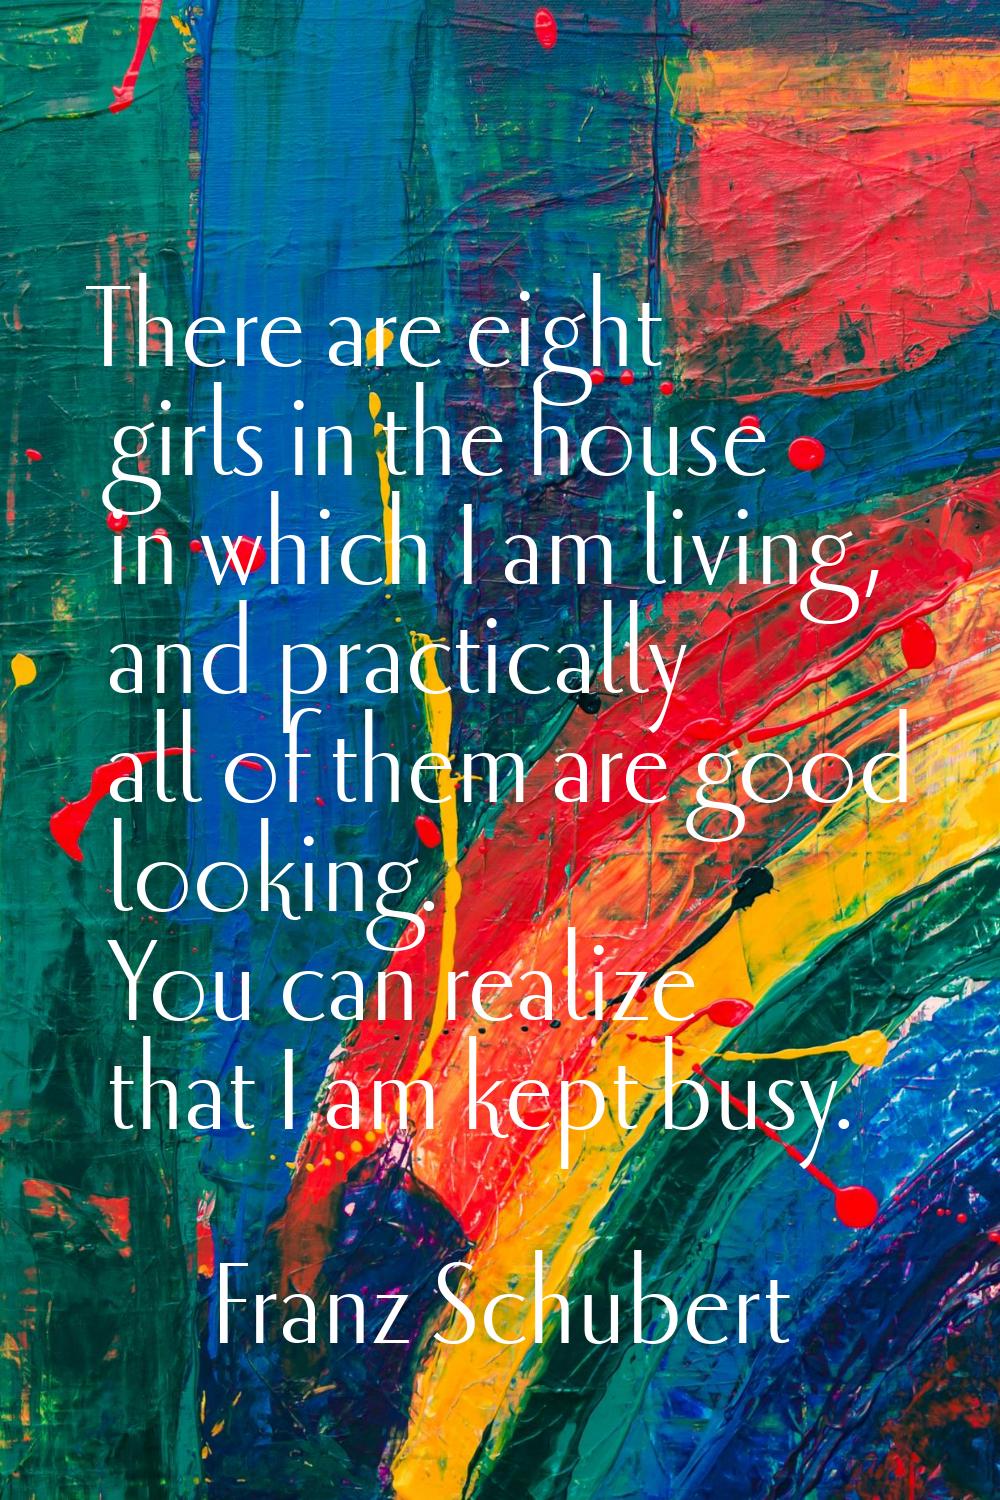 There are eight girls in the house in which I am living, and practically all of them are good looki